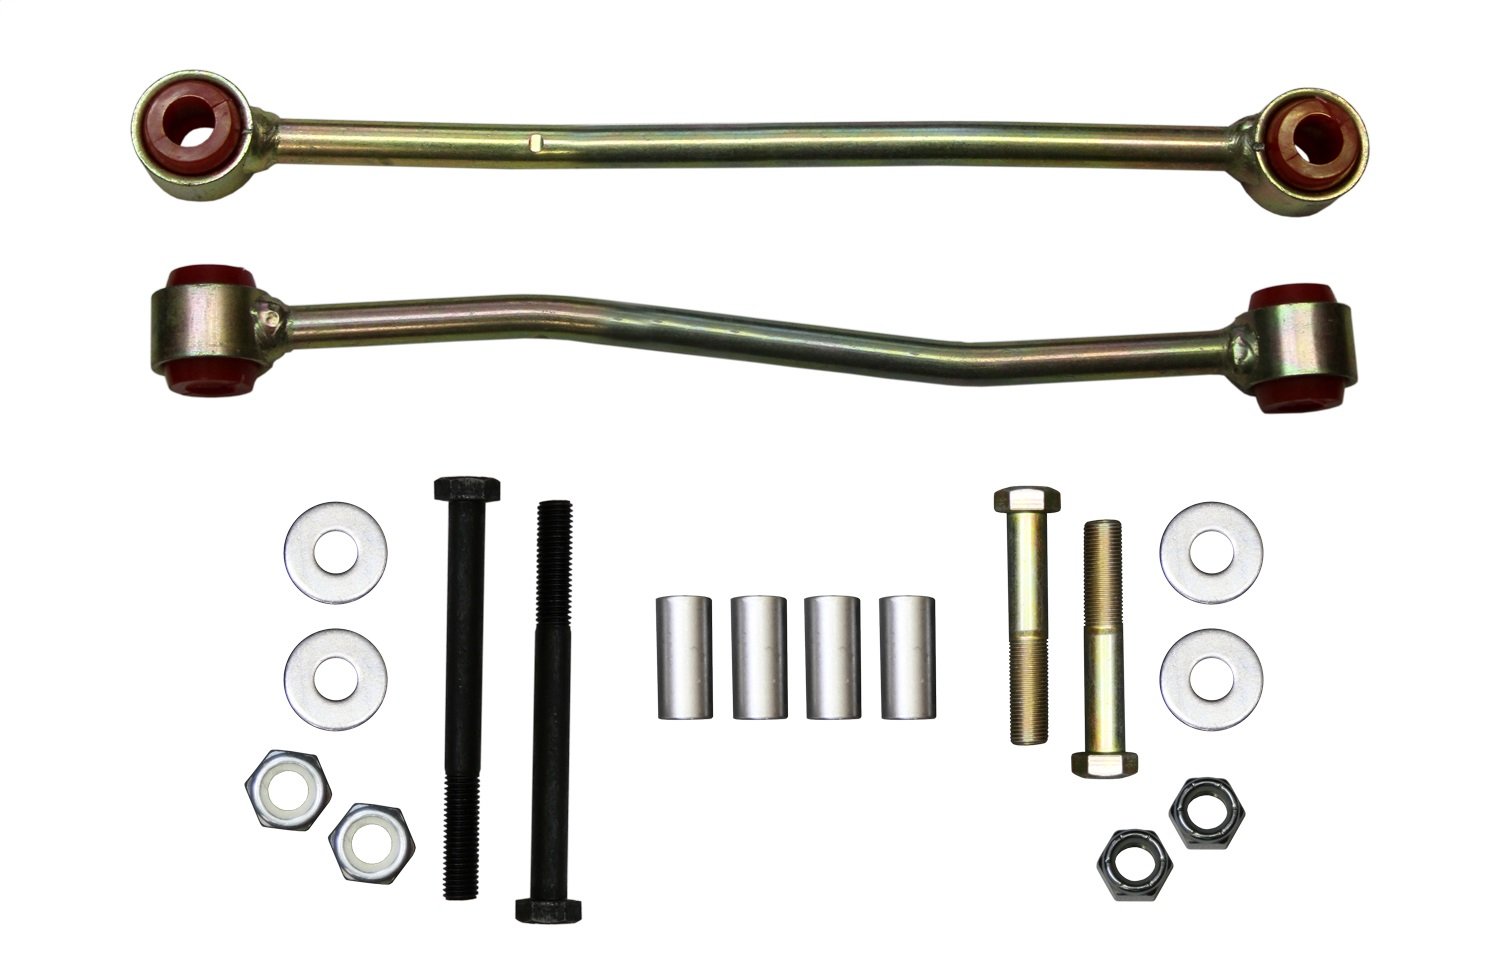 Sway Bar End Links 1999, 2003 F-250/F-350 Pickup Super Duty 4WD - Built After March 1999